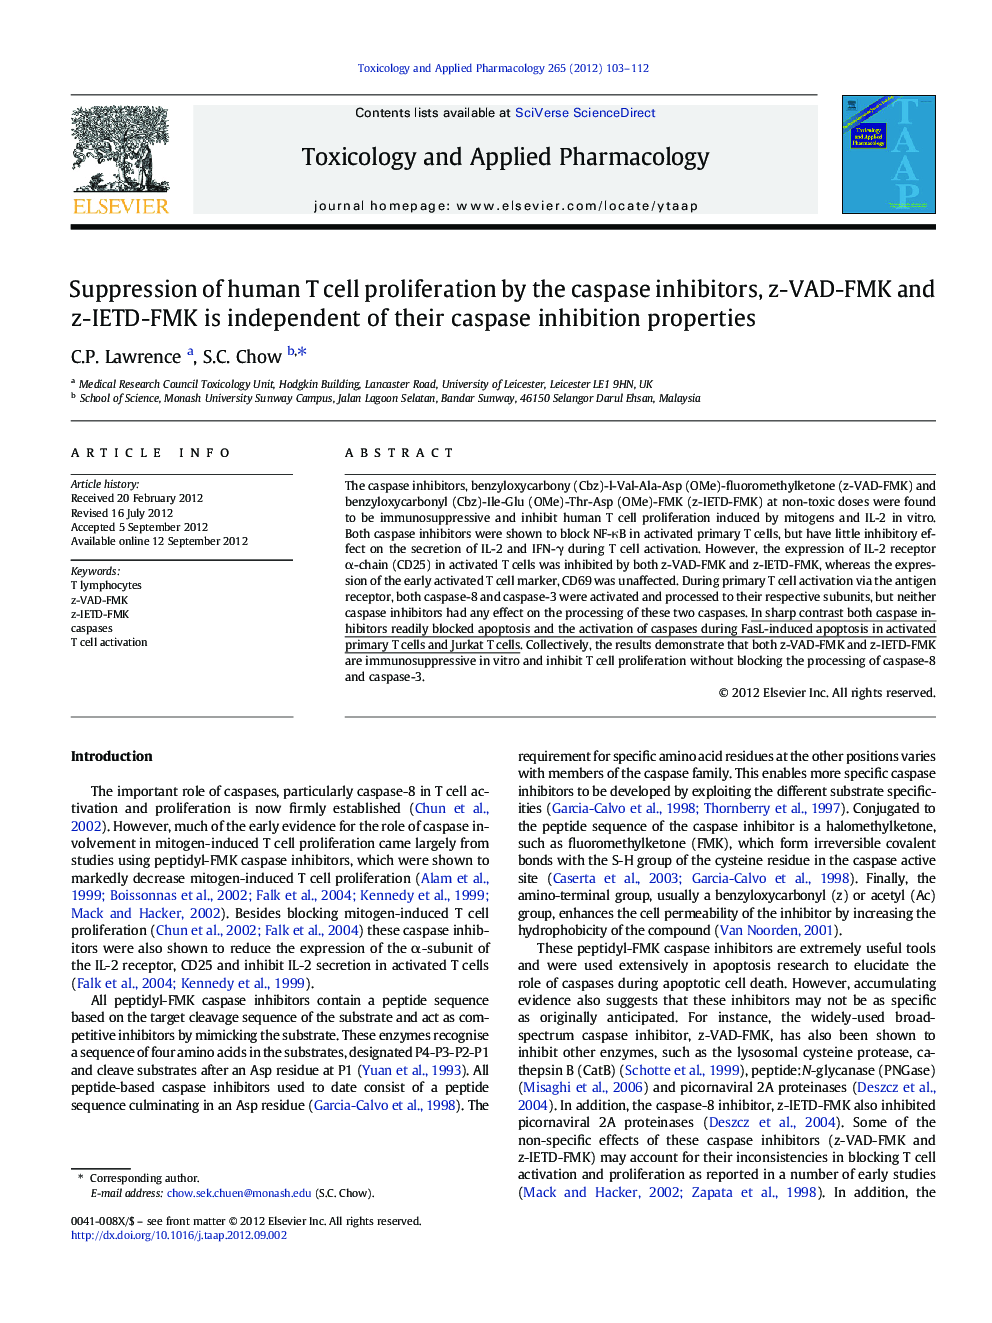 Suppression of human T cell proliferation by the caspase inhibitors, z-VAD-FMK and z-IETD-FMK is independent of their caspase inhibition properties